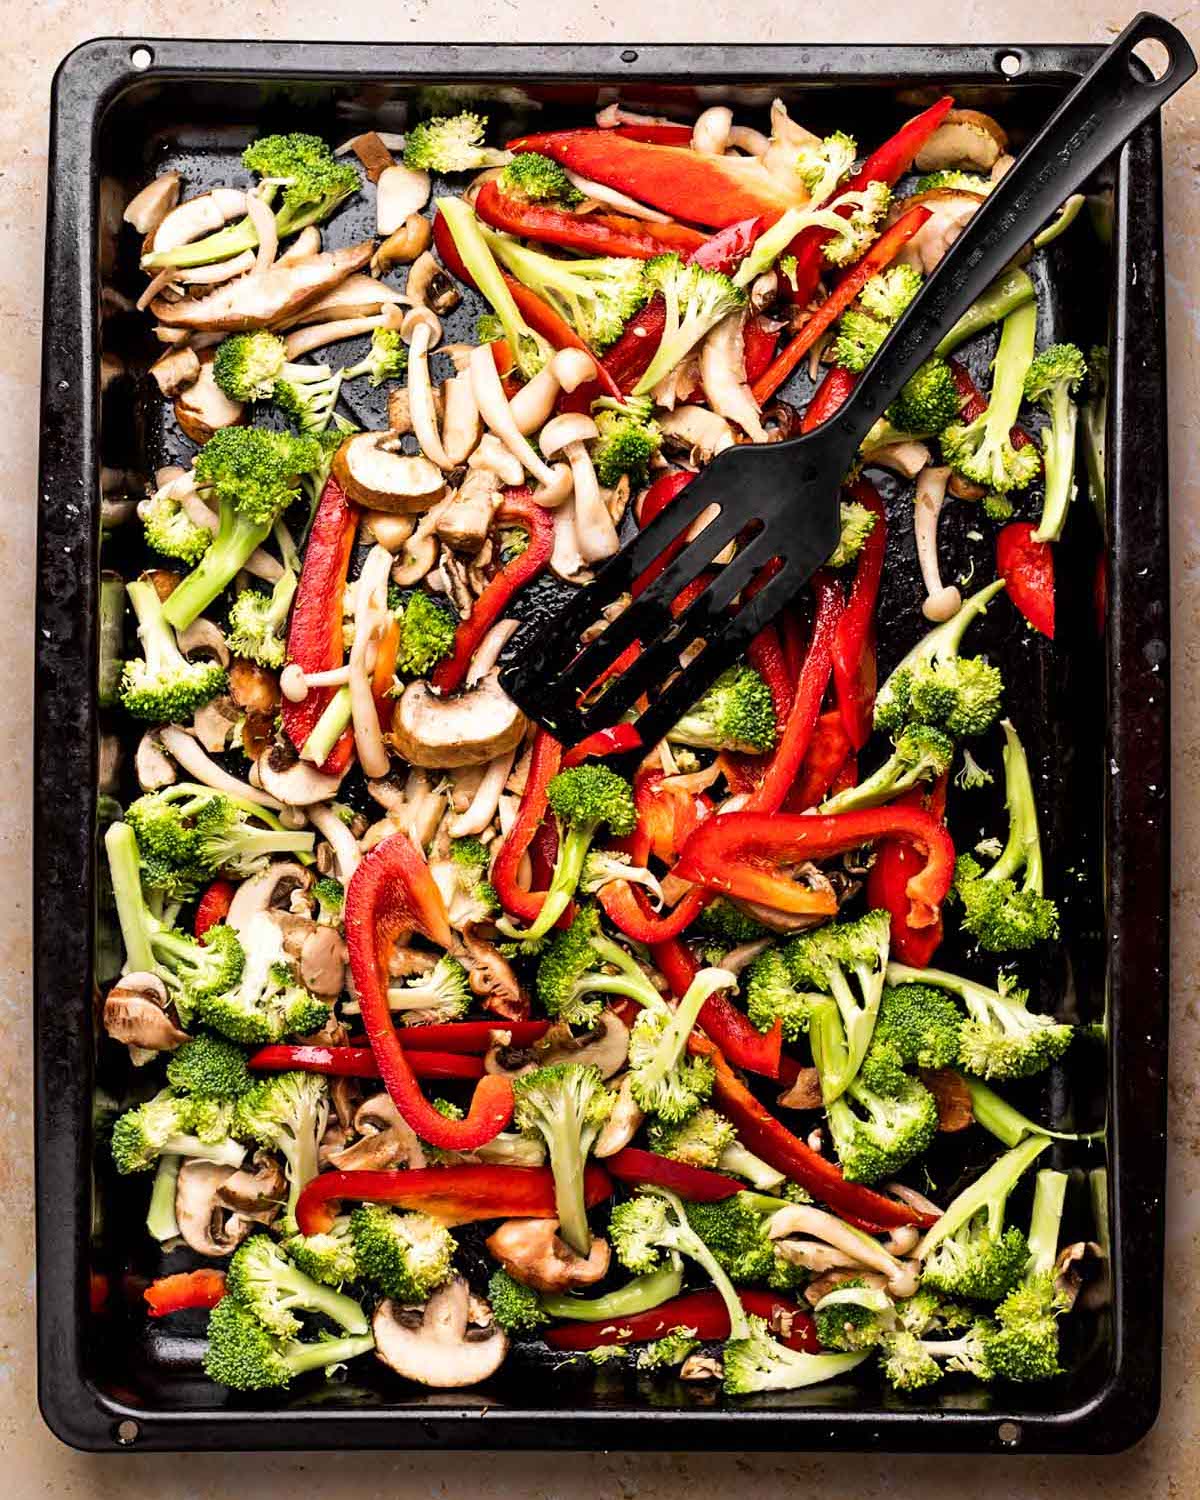 An overhead shot of a baking sheet of sliced vegetables with a black spatula.